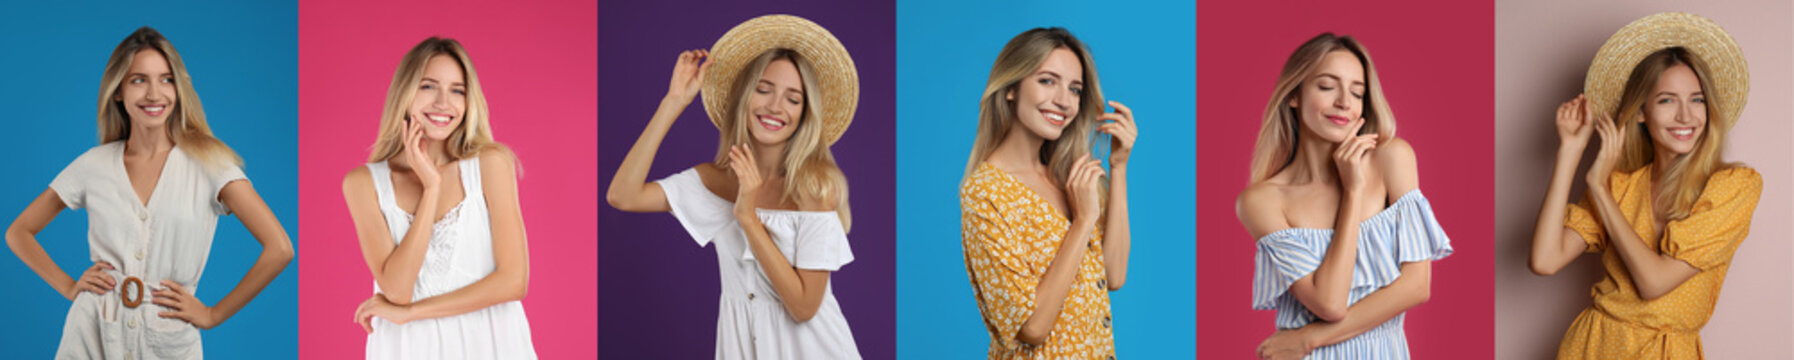 Collage with photos of young woman wearing different dresses on bright backgrounds